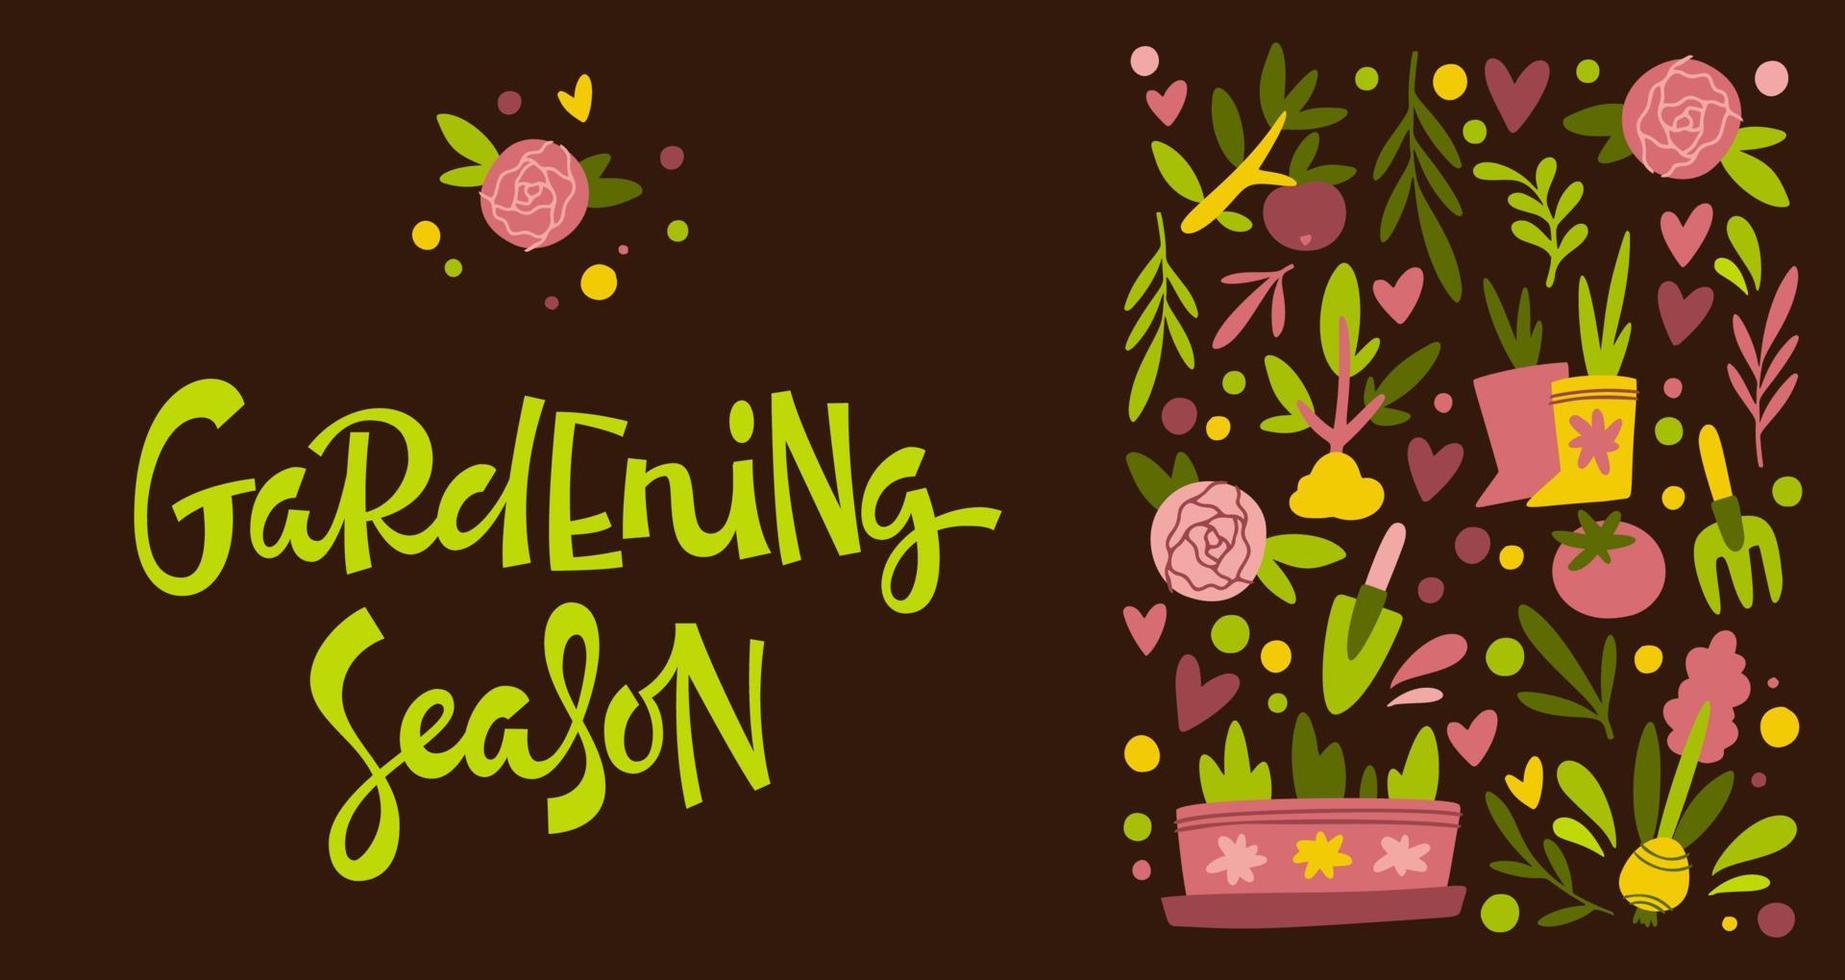 Poster with Gardening Season inscription and flowers vector